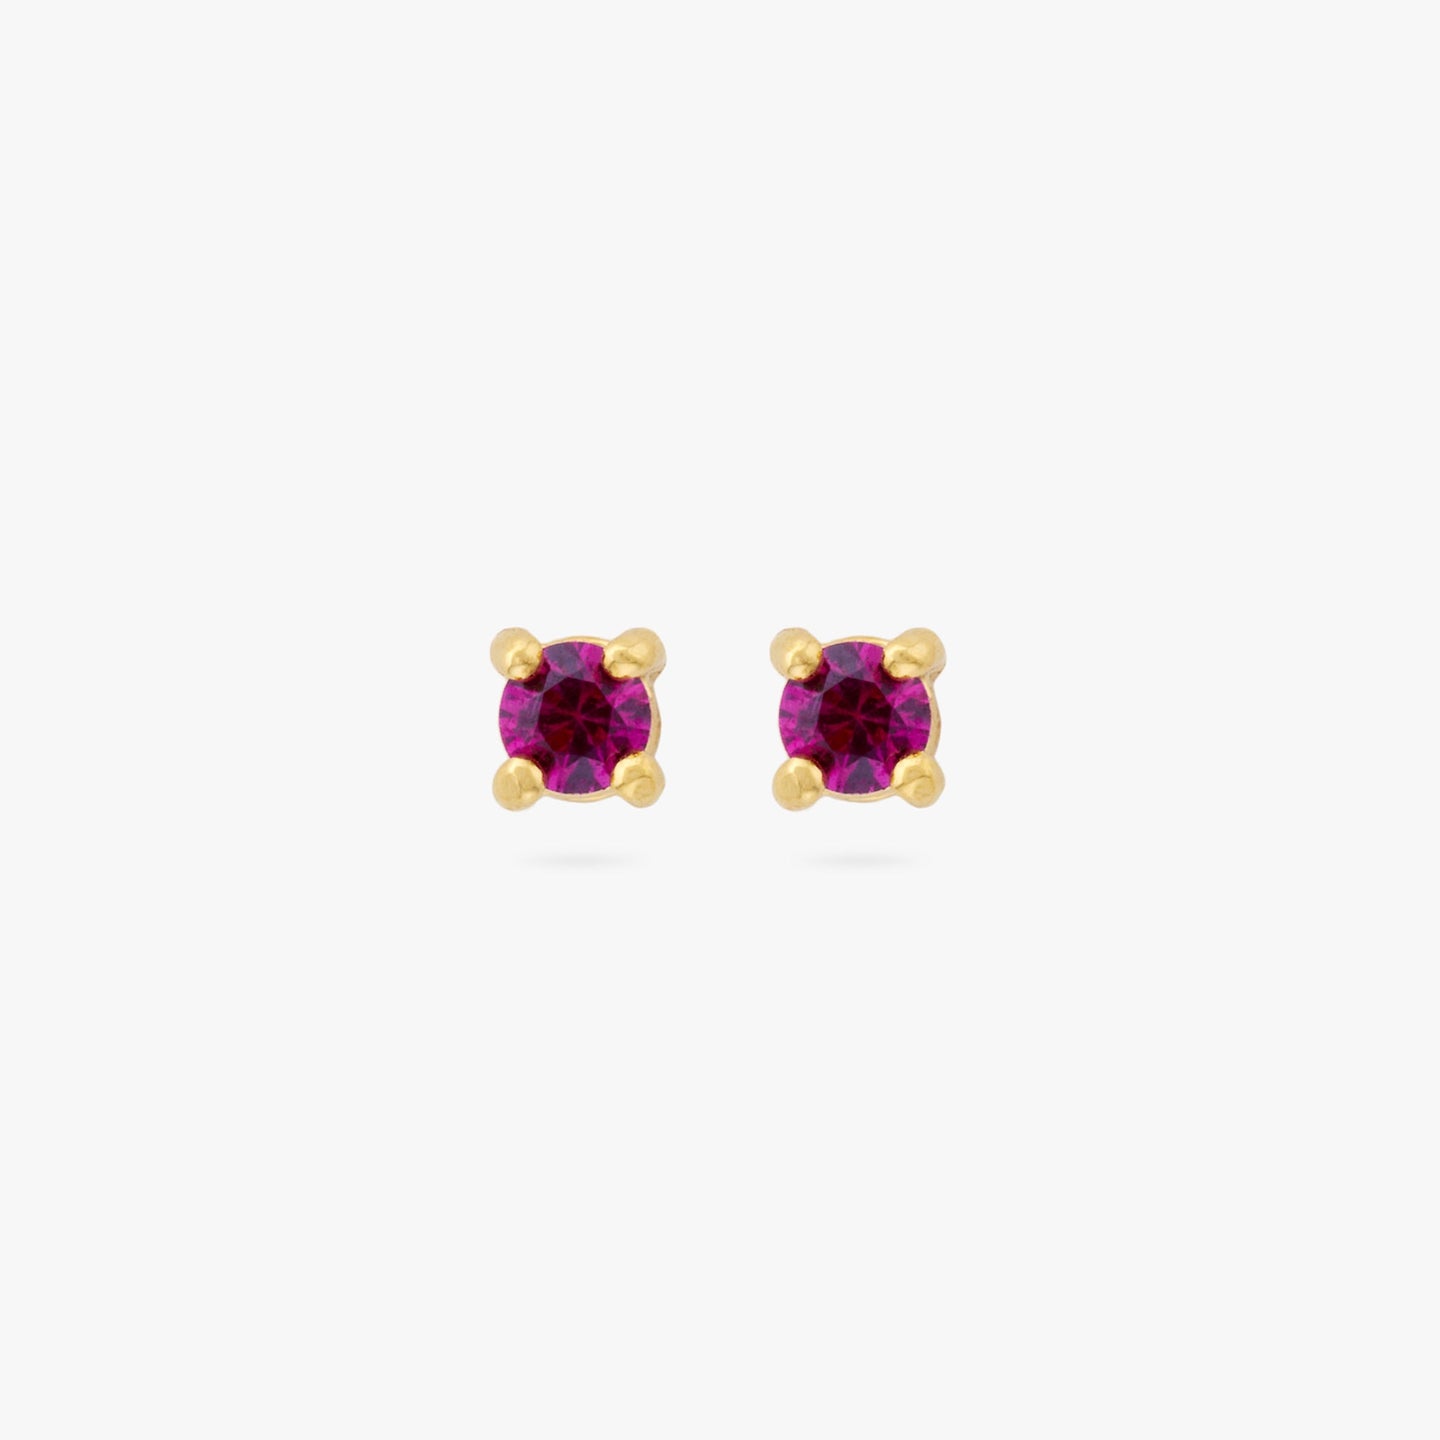 A pair of mini gold studs with pink cz gems [pair] color:null|gold/pink